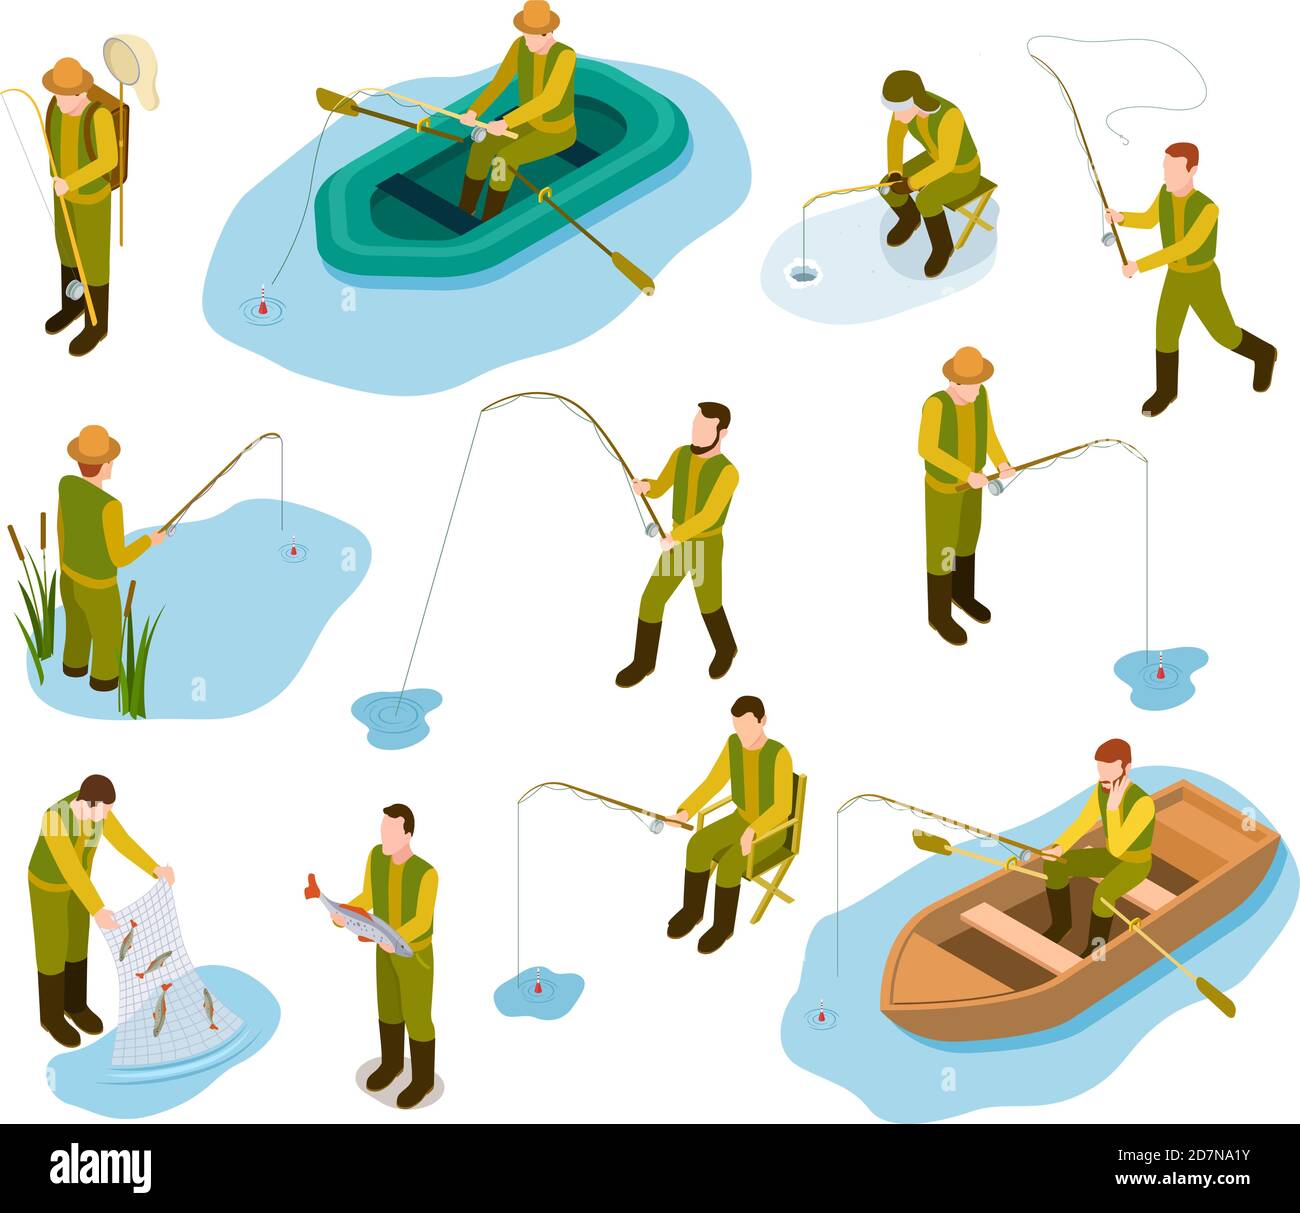 Boat people Cut Out Stock Images & Pictures - Page 2 - Alamy